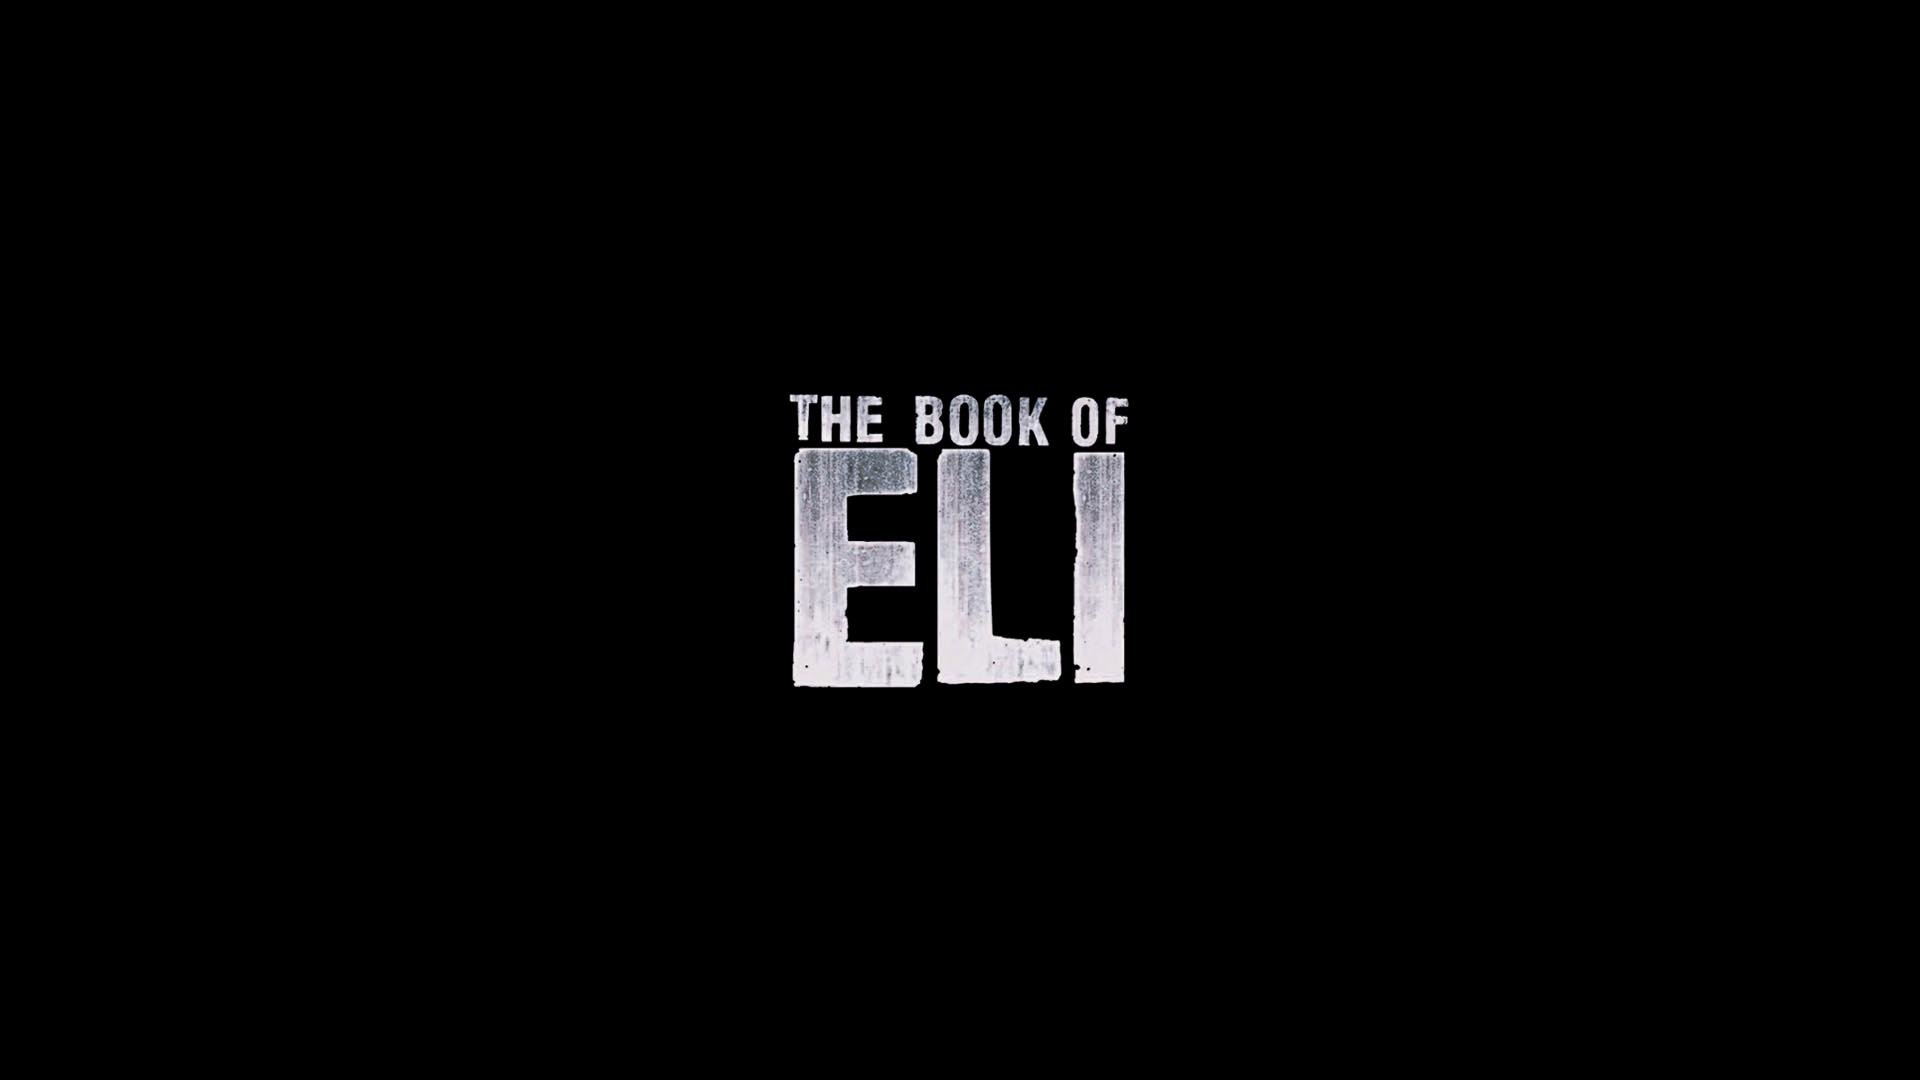 Download full hd The Book Of Eli PC wallpaper ID:306082 for free